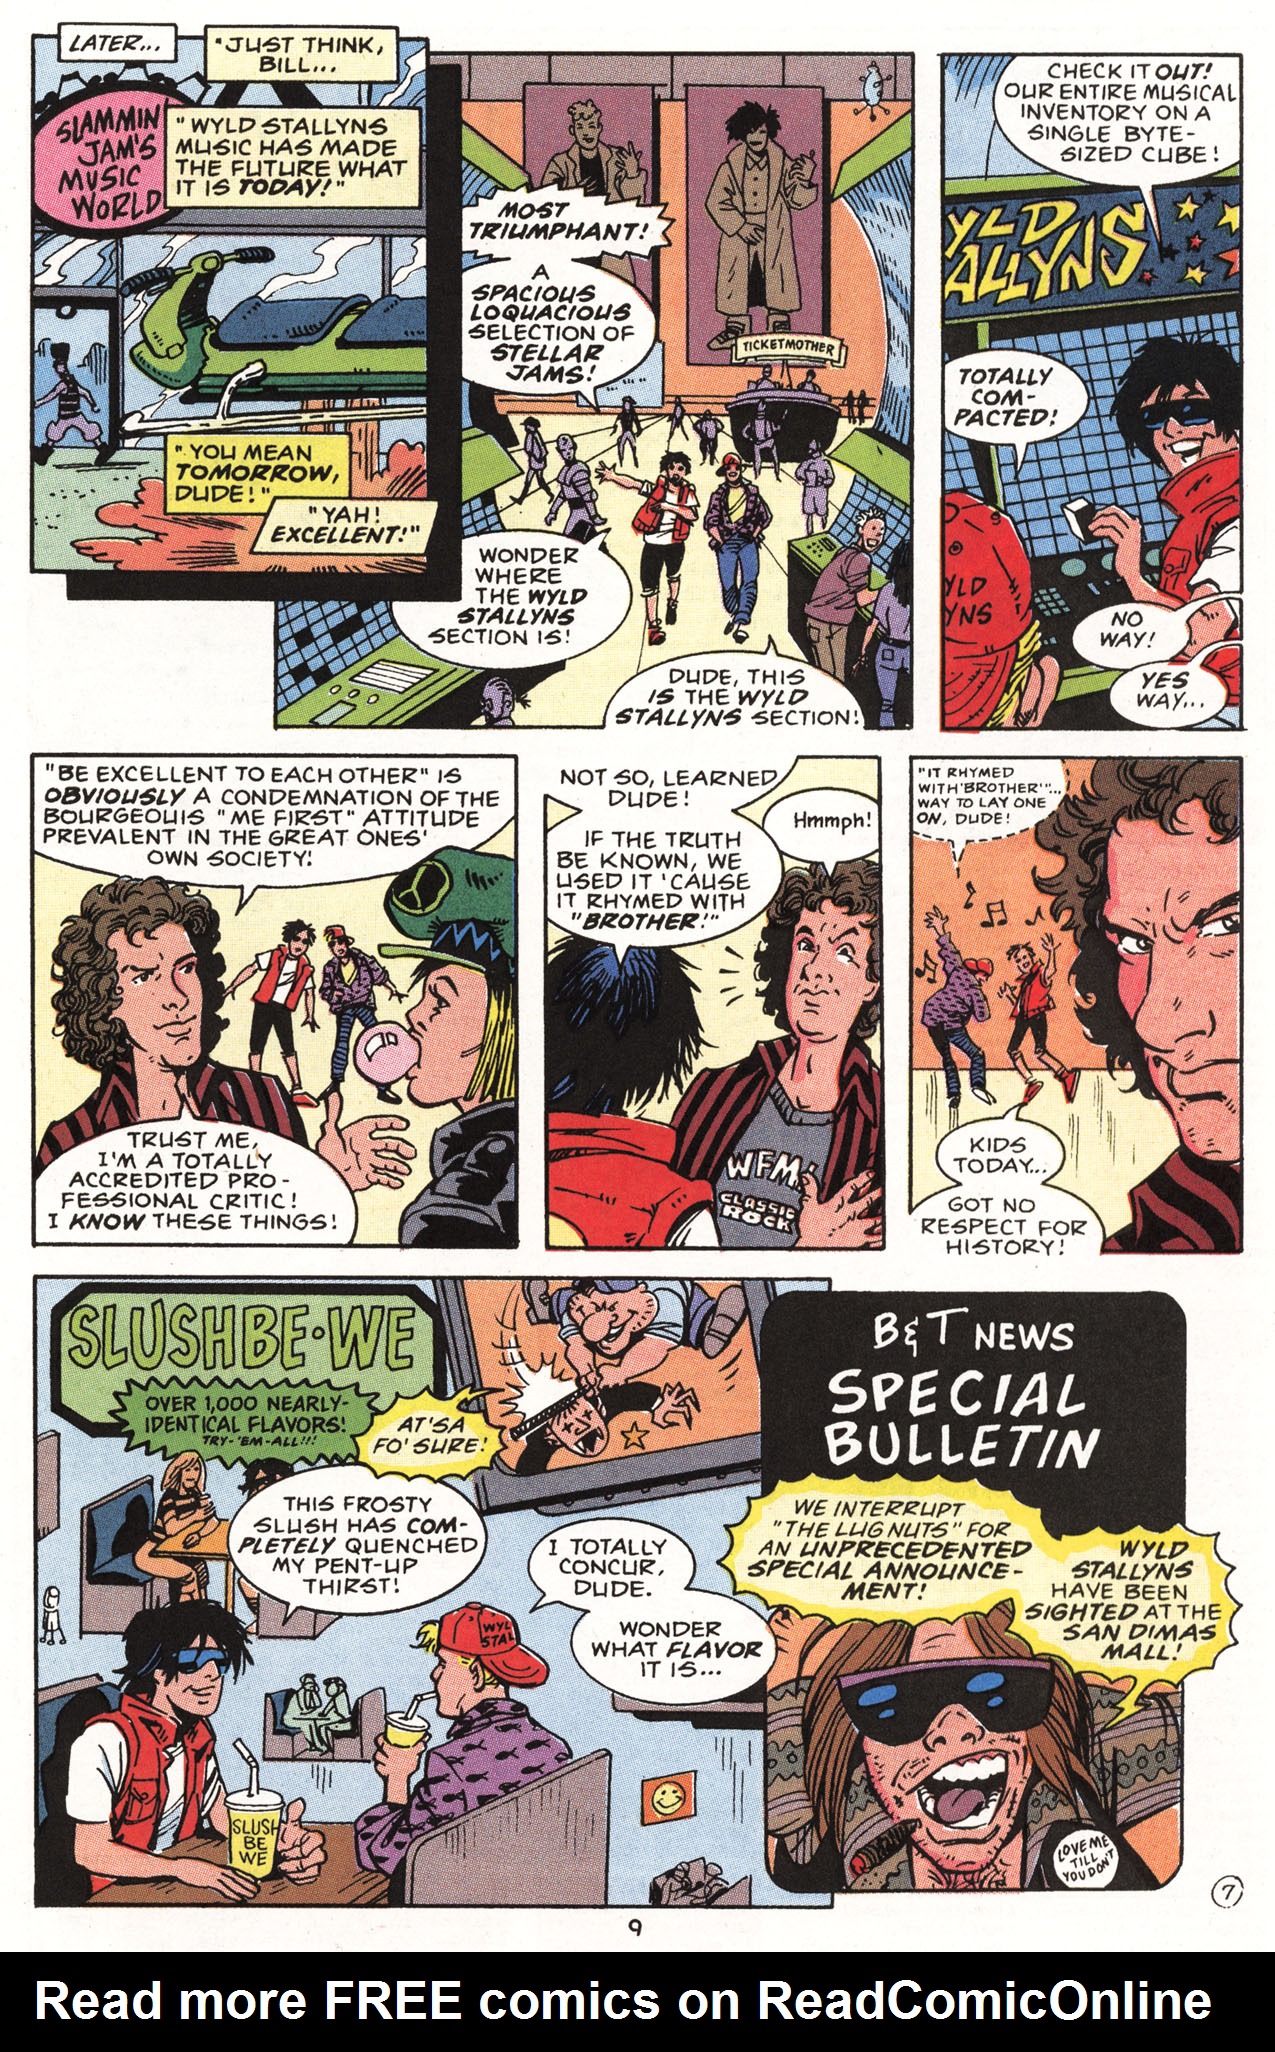 Read online Bill & Ted's Excellent Comic Book comic -  Issue #8 - 11